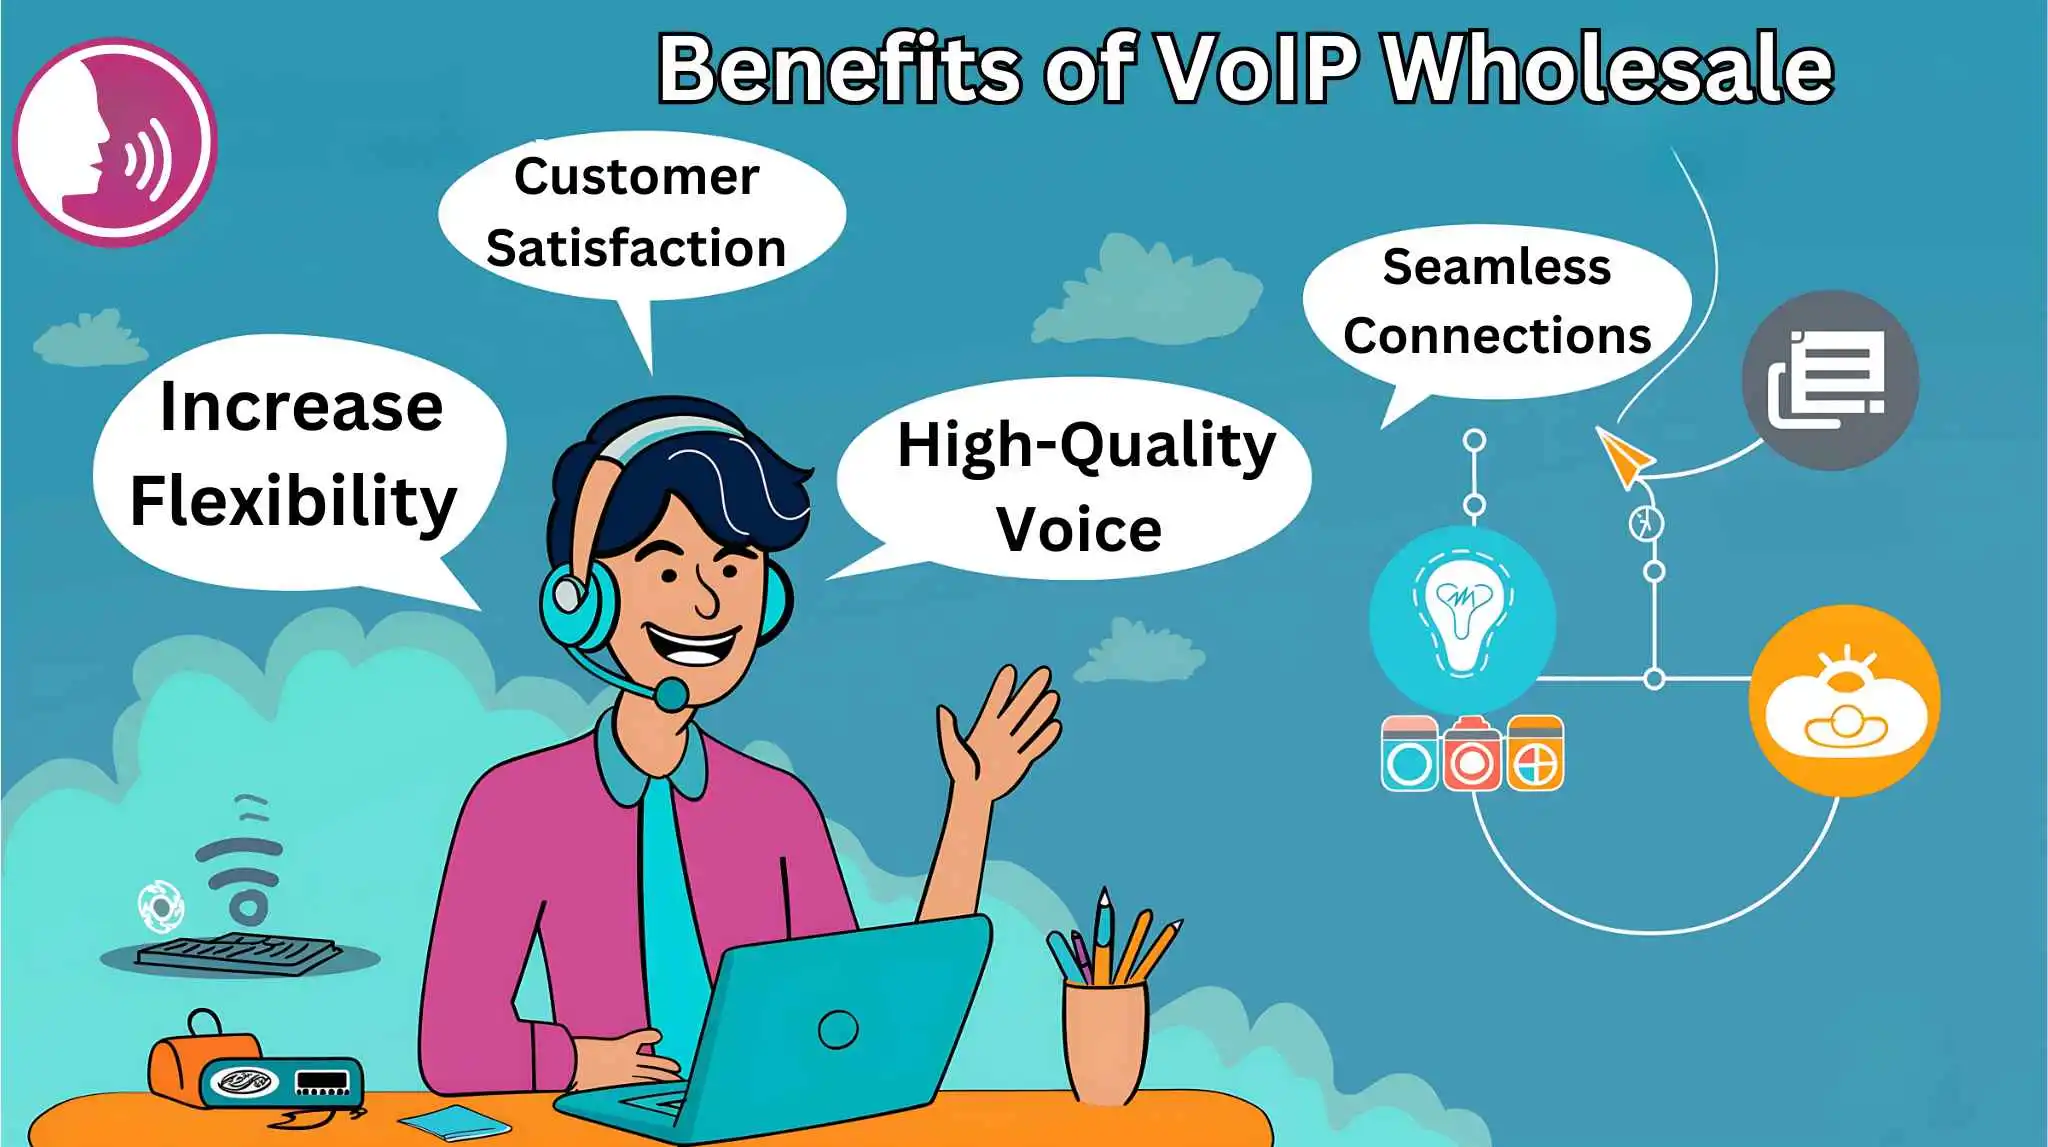 Benefits of VoIP Wholesale